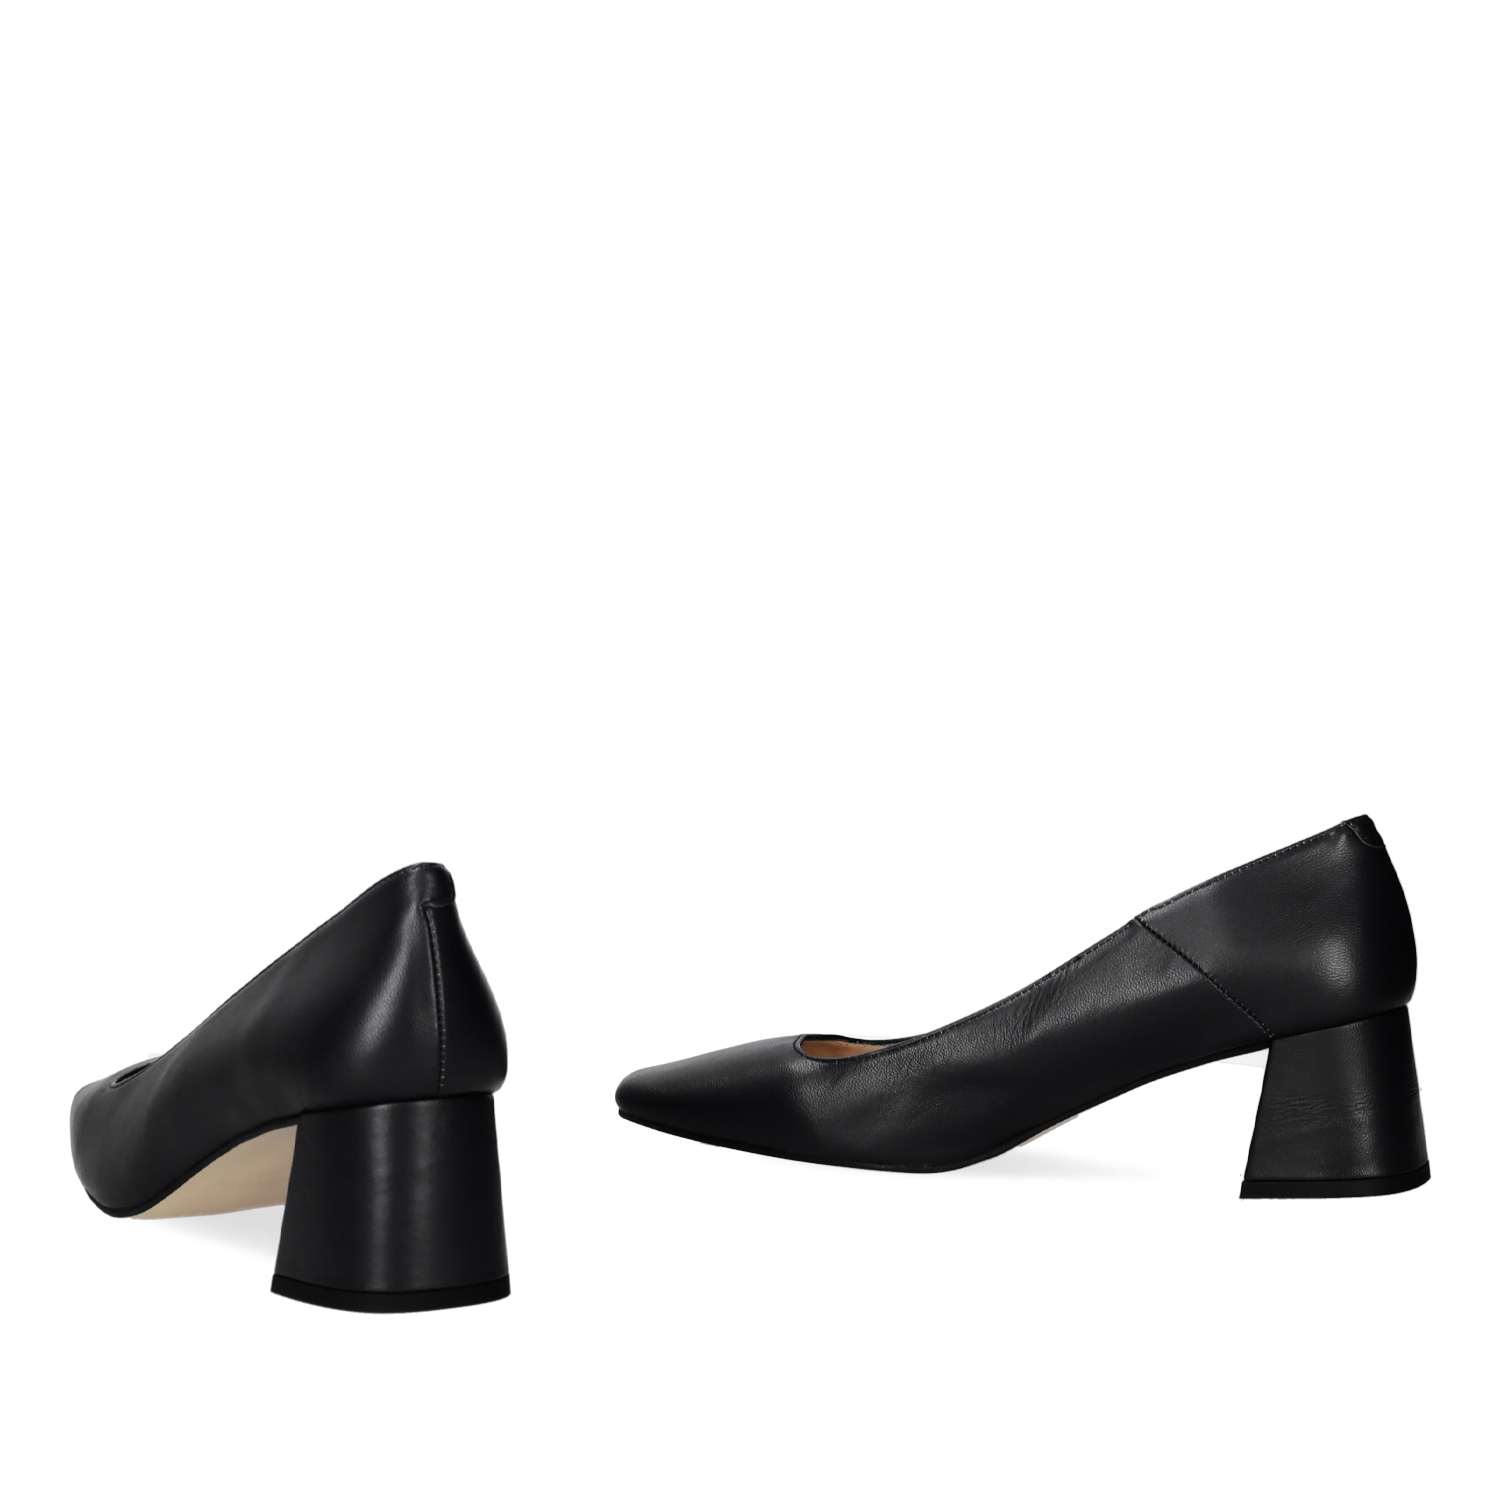 Heeled shoe in black leather 